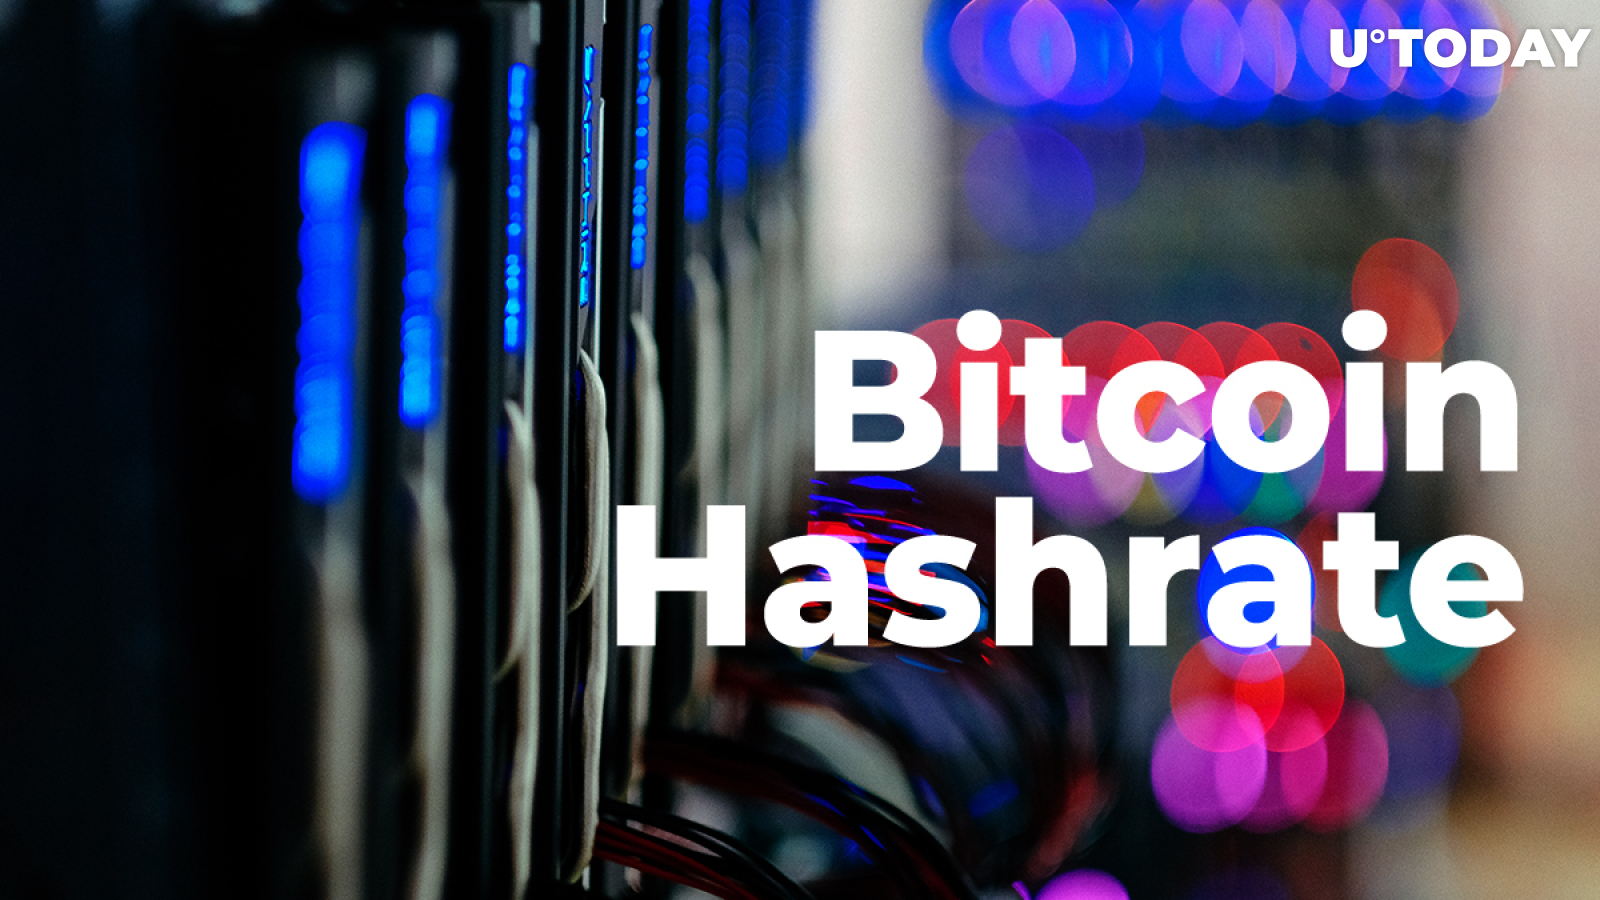 Bitcoin (BTC) Hashrate Surges to New ATH – Miner Capitulation Off the Agenda?